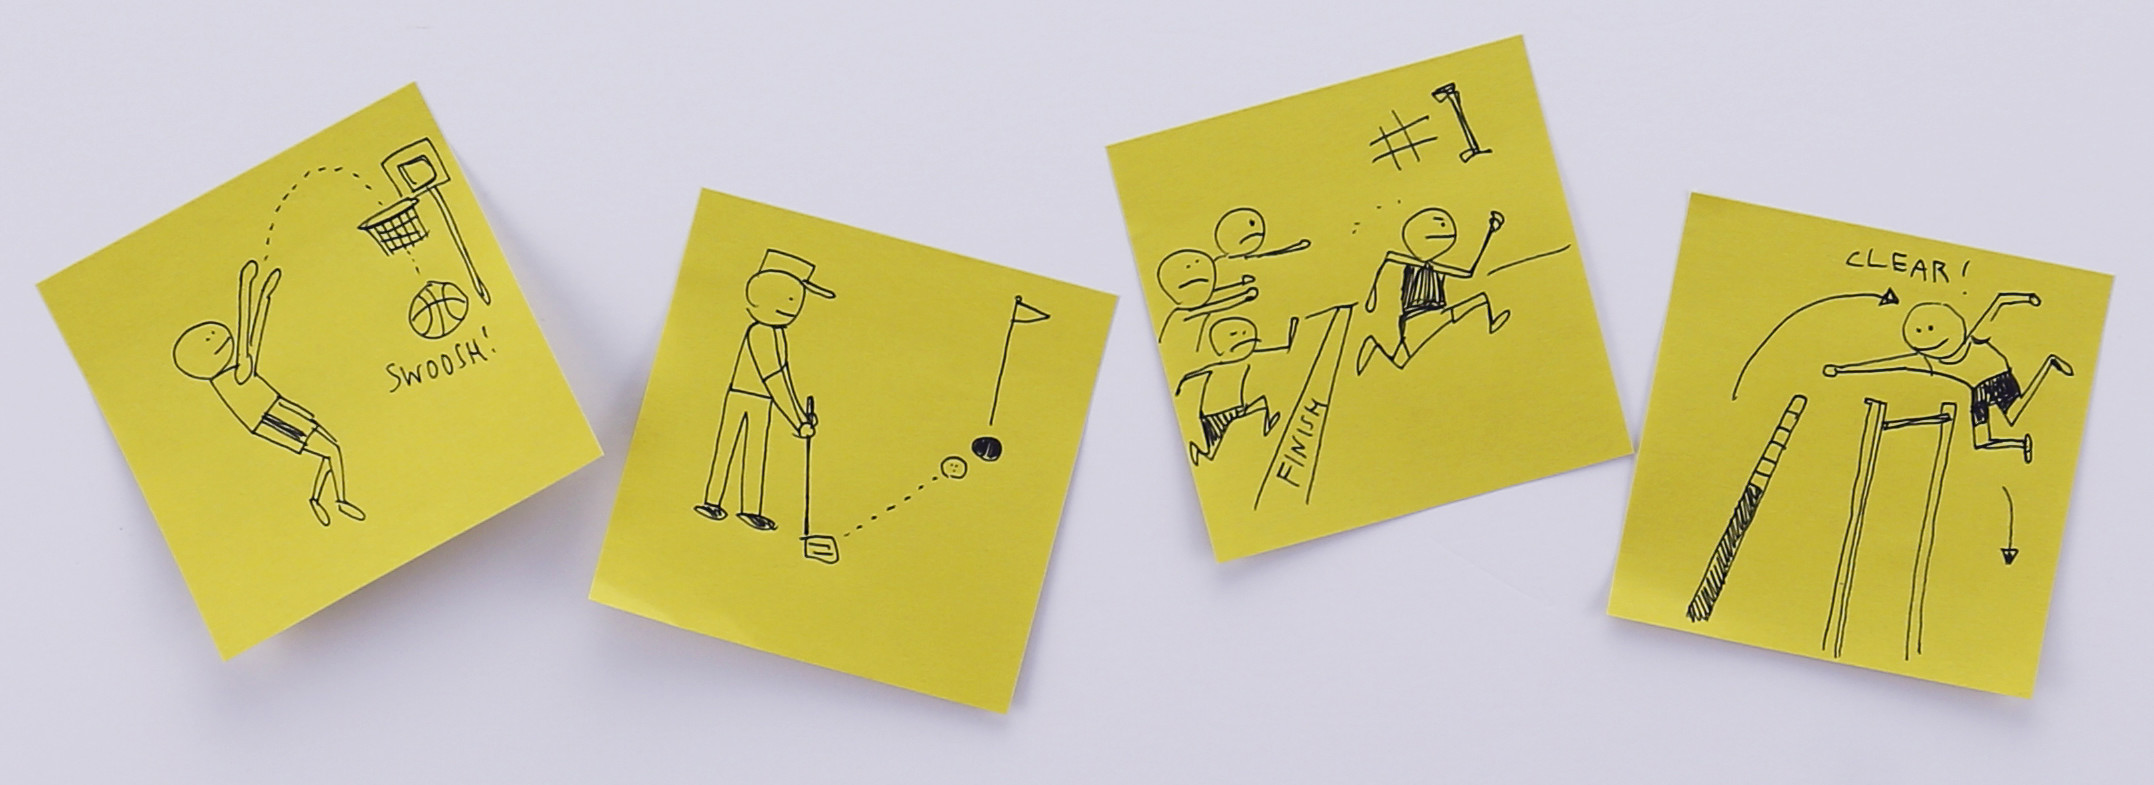 Post-it sketches of athletes playing sports